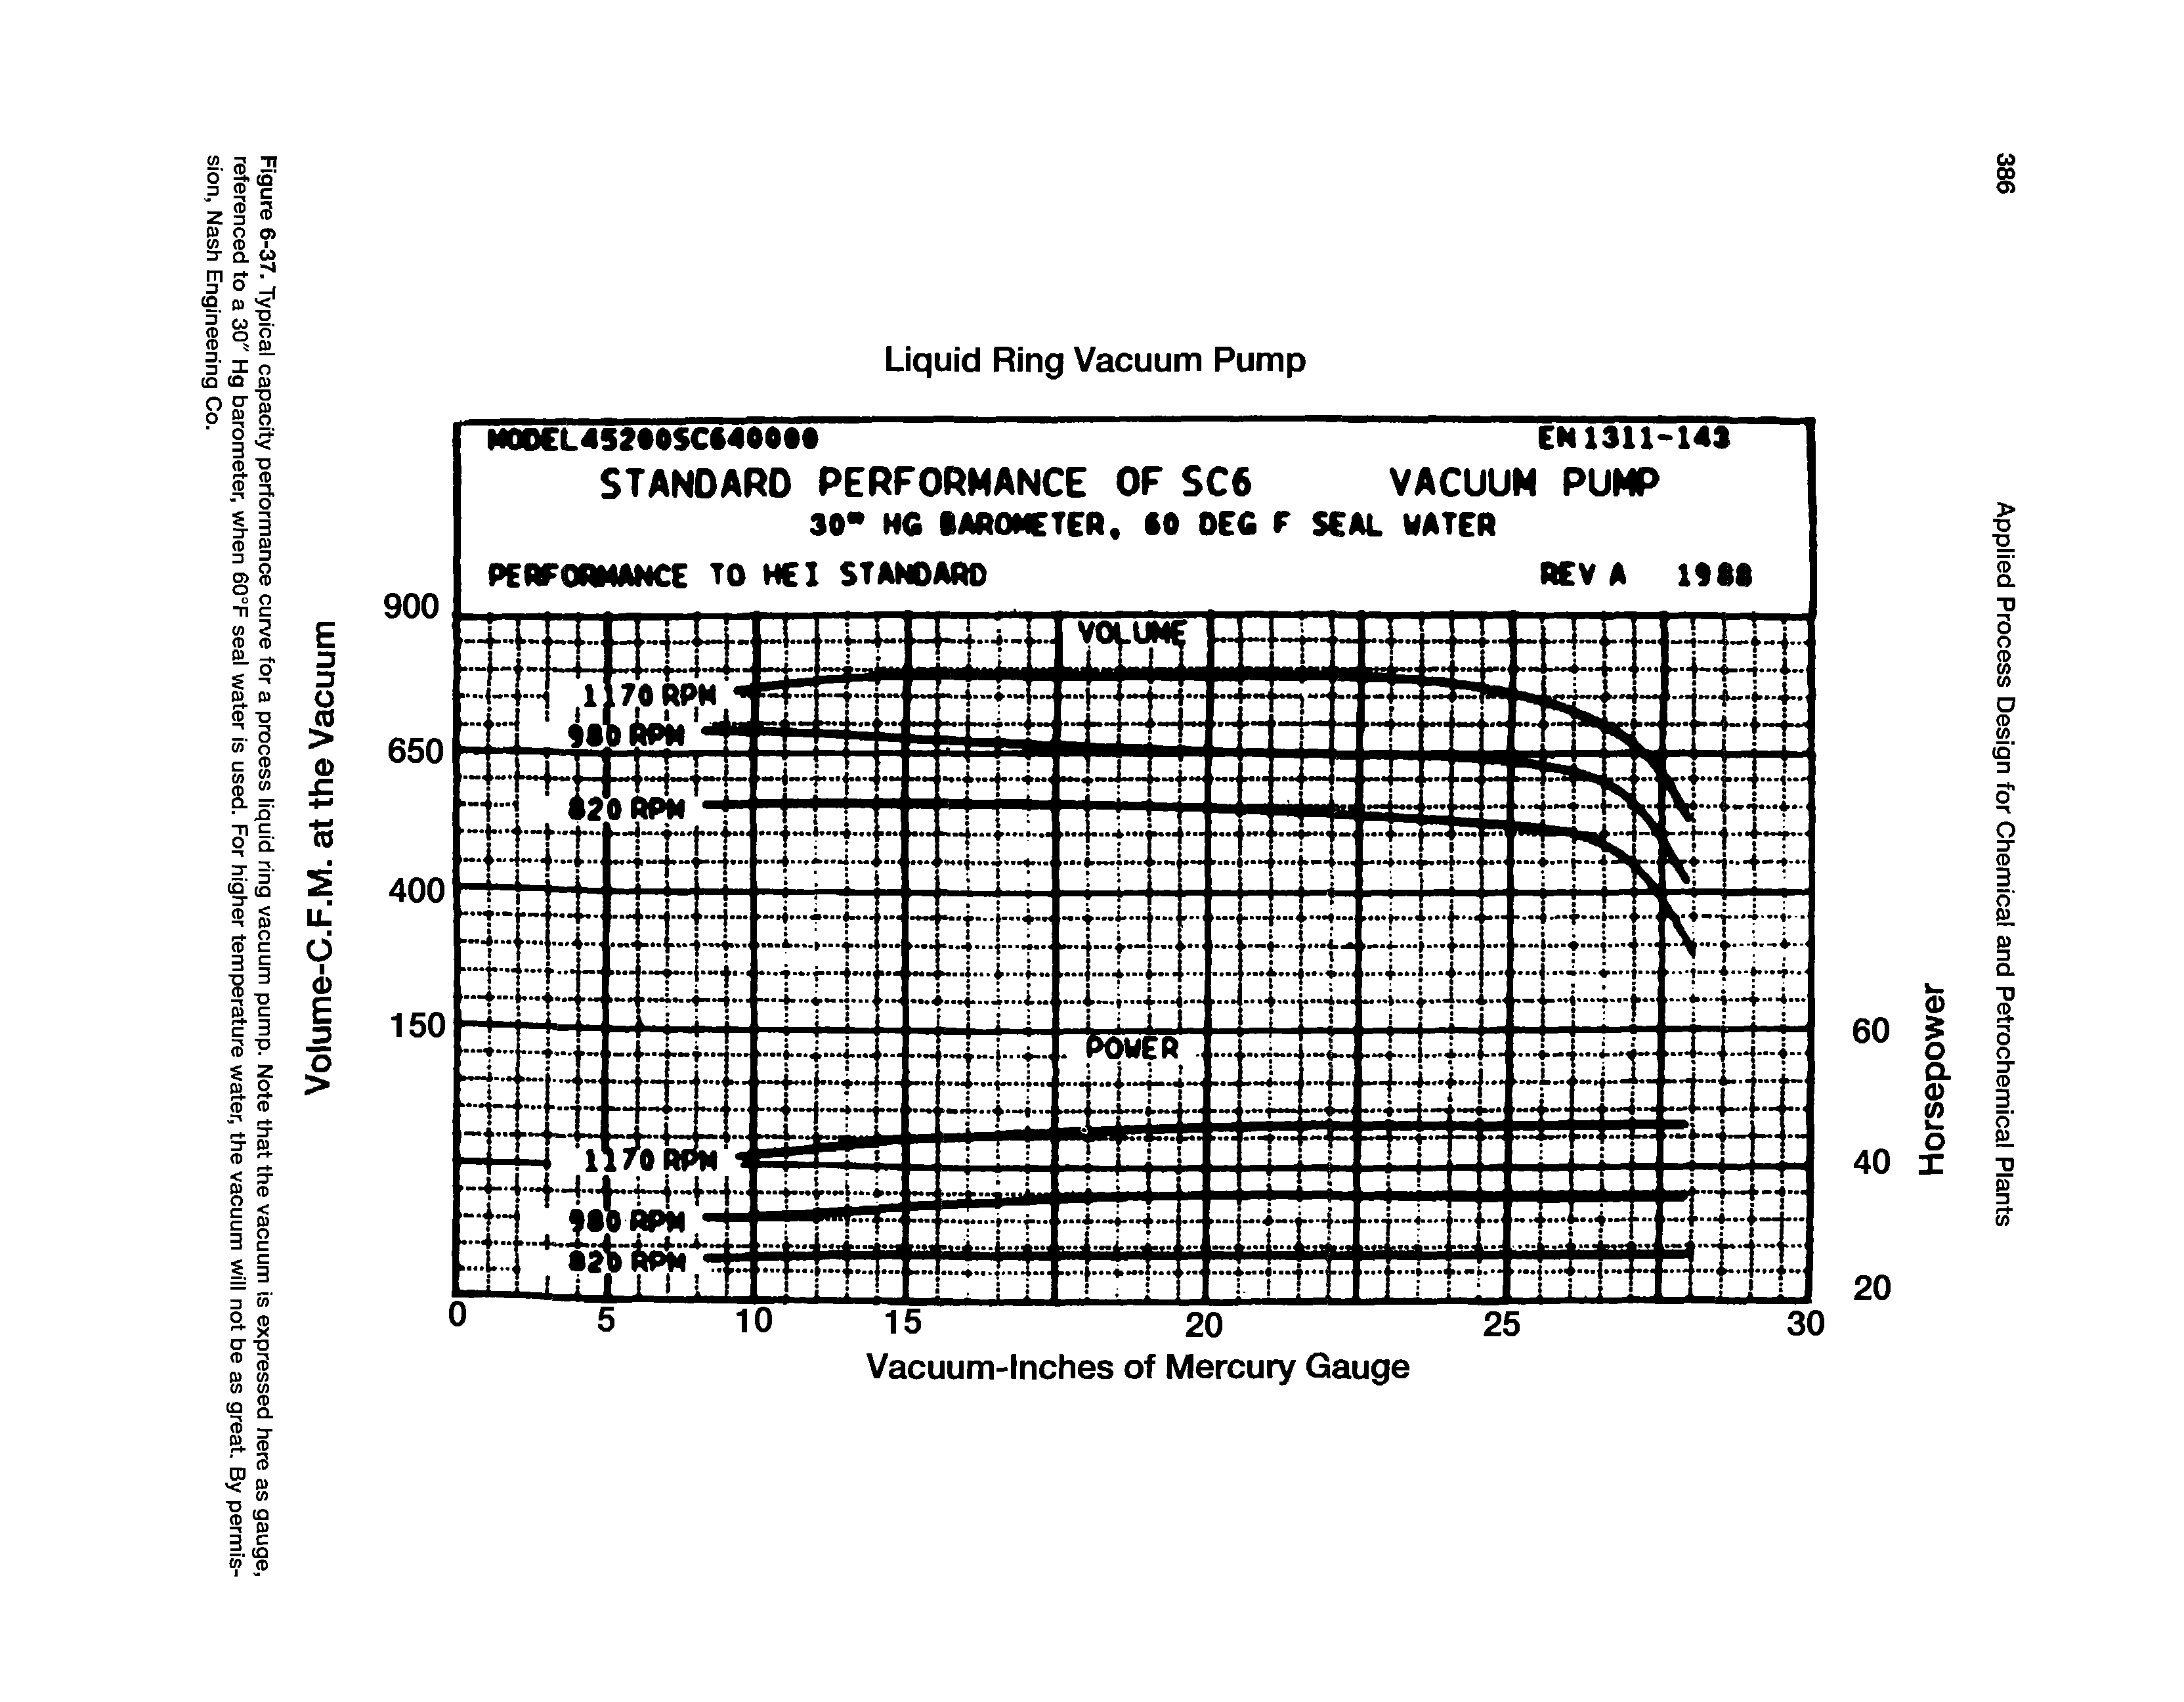 Figure 6-37. Typical capacity performance curve for a process liquid ring vacuum pump. Note that the vacuum is expressed here as gauge, referenced to a 30" Hg barometer, when 60°F seal water is used. For higher temperature water, the vacuum will not be as great. By permission, Nash Engineenng Co.